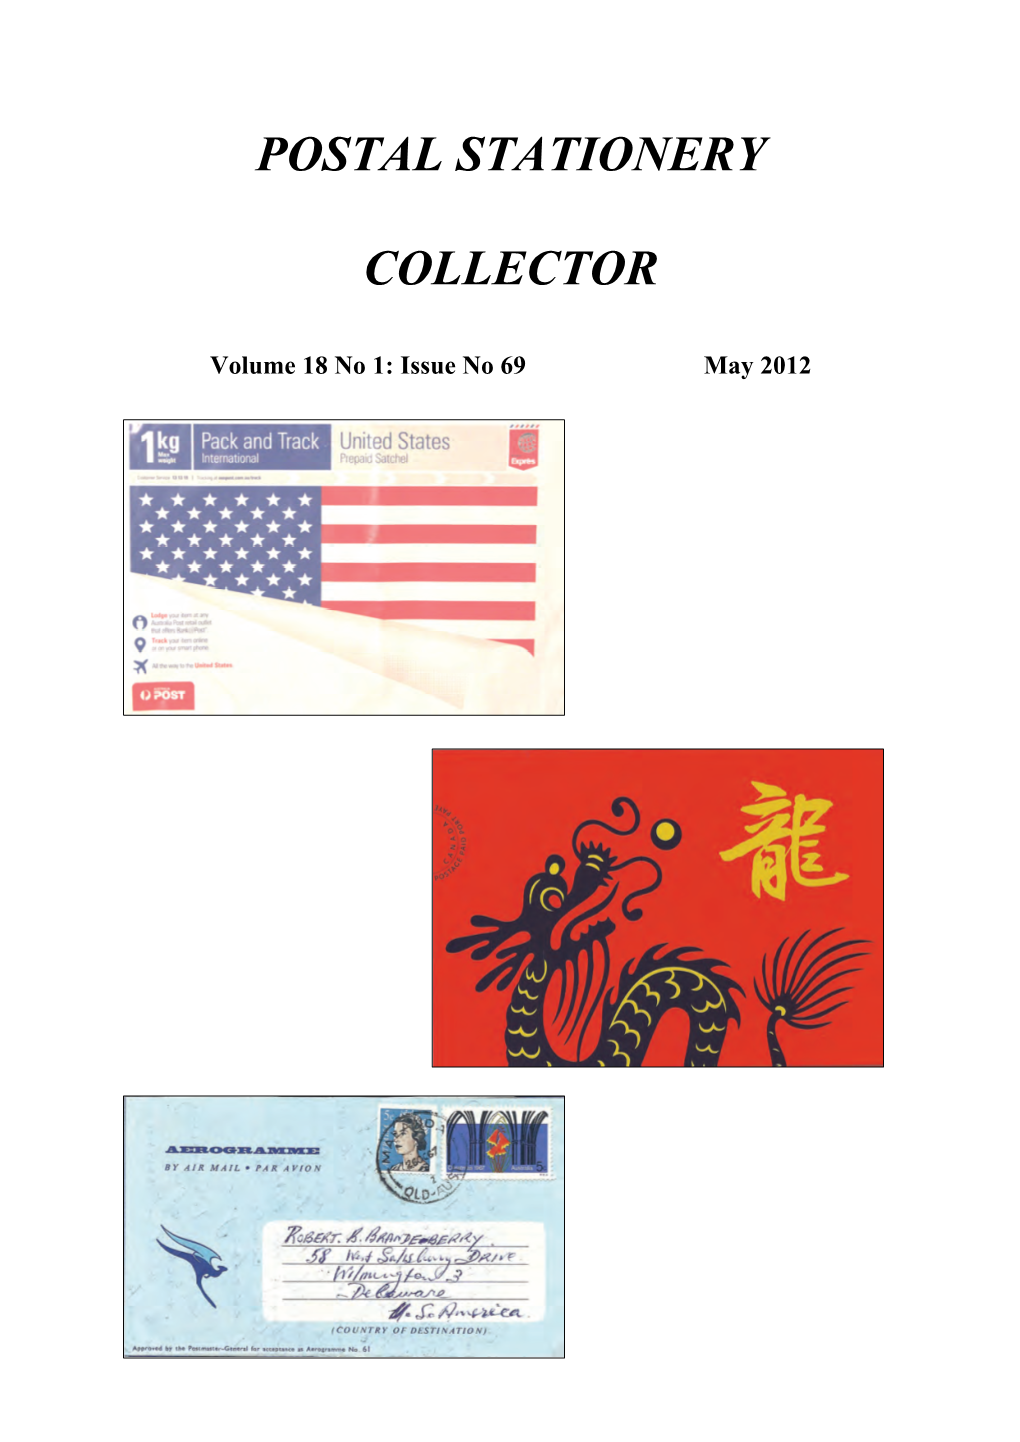 Postal Stationery Collectors to Maintain Contact with Other Stationery Collectors and to Learn More About Their Hobby